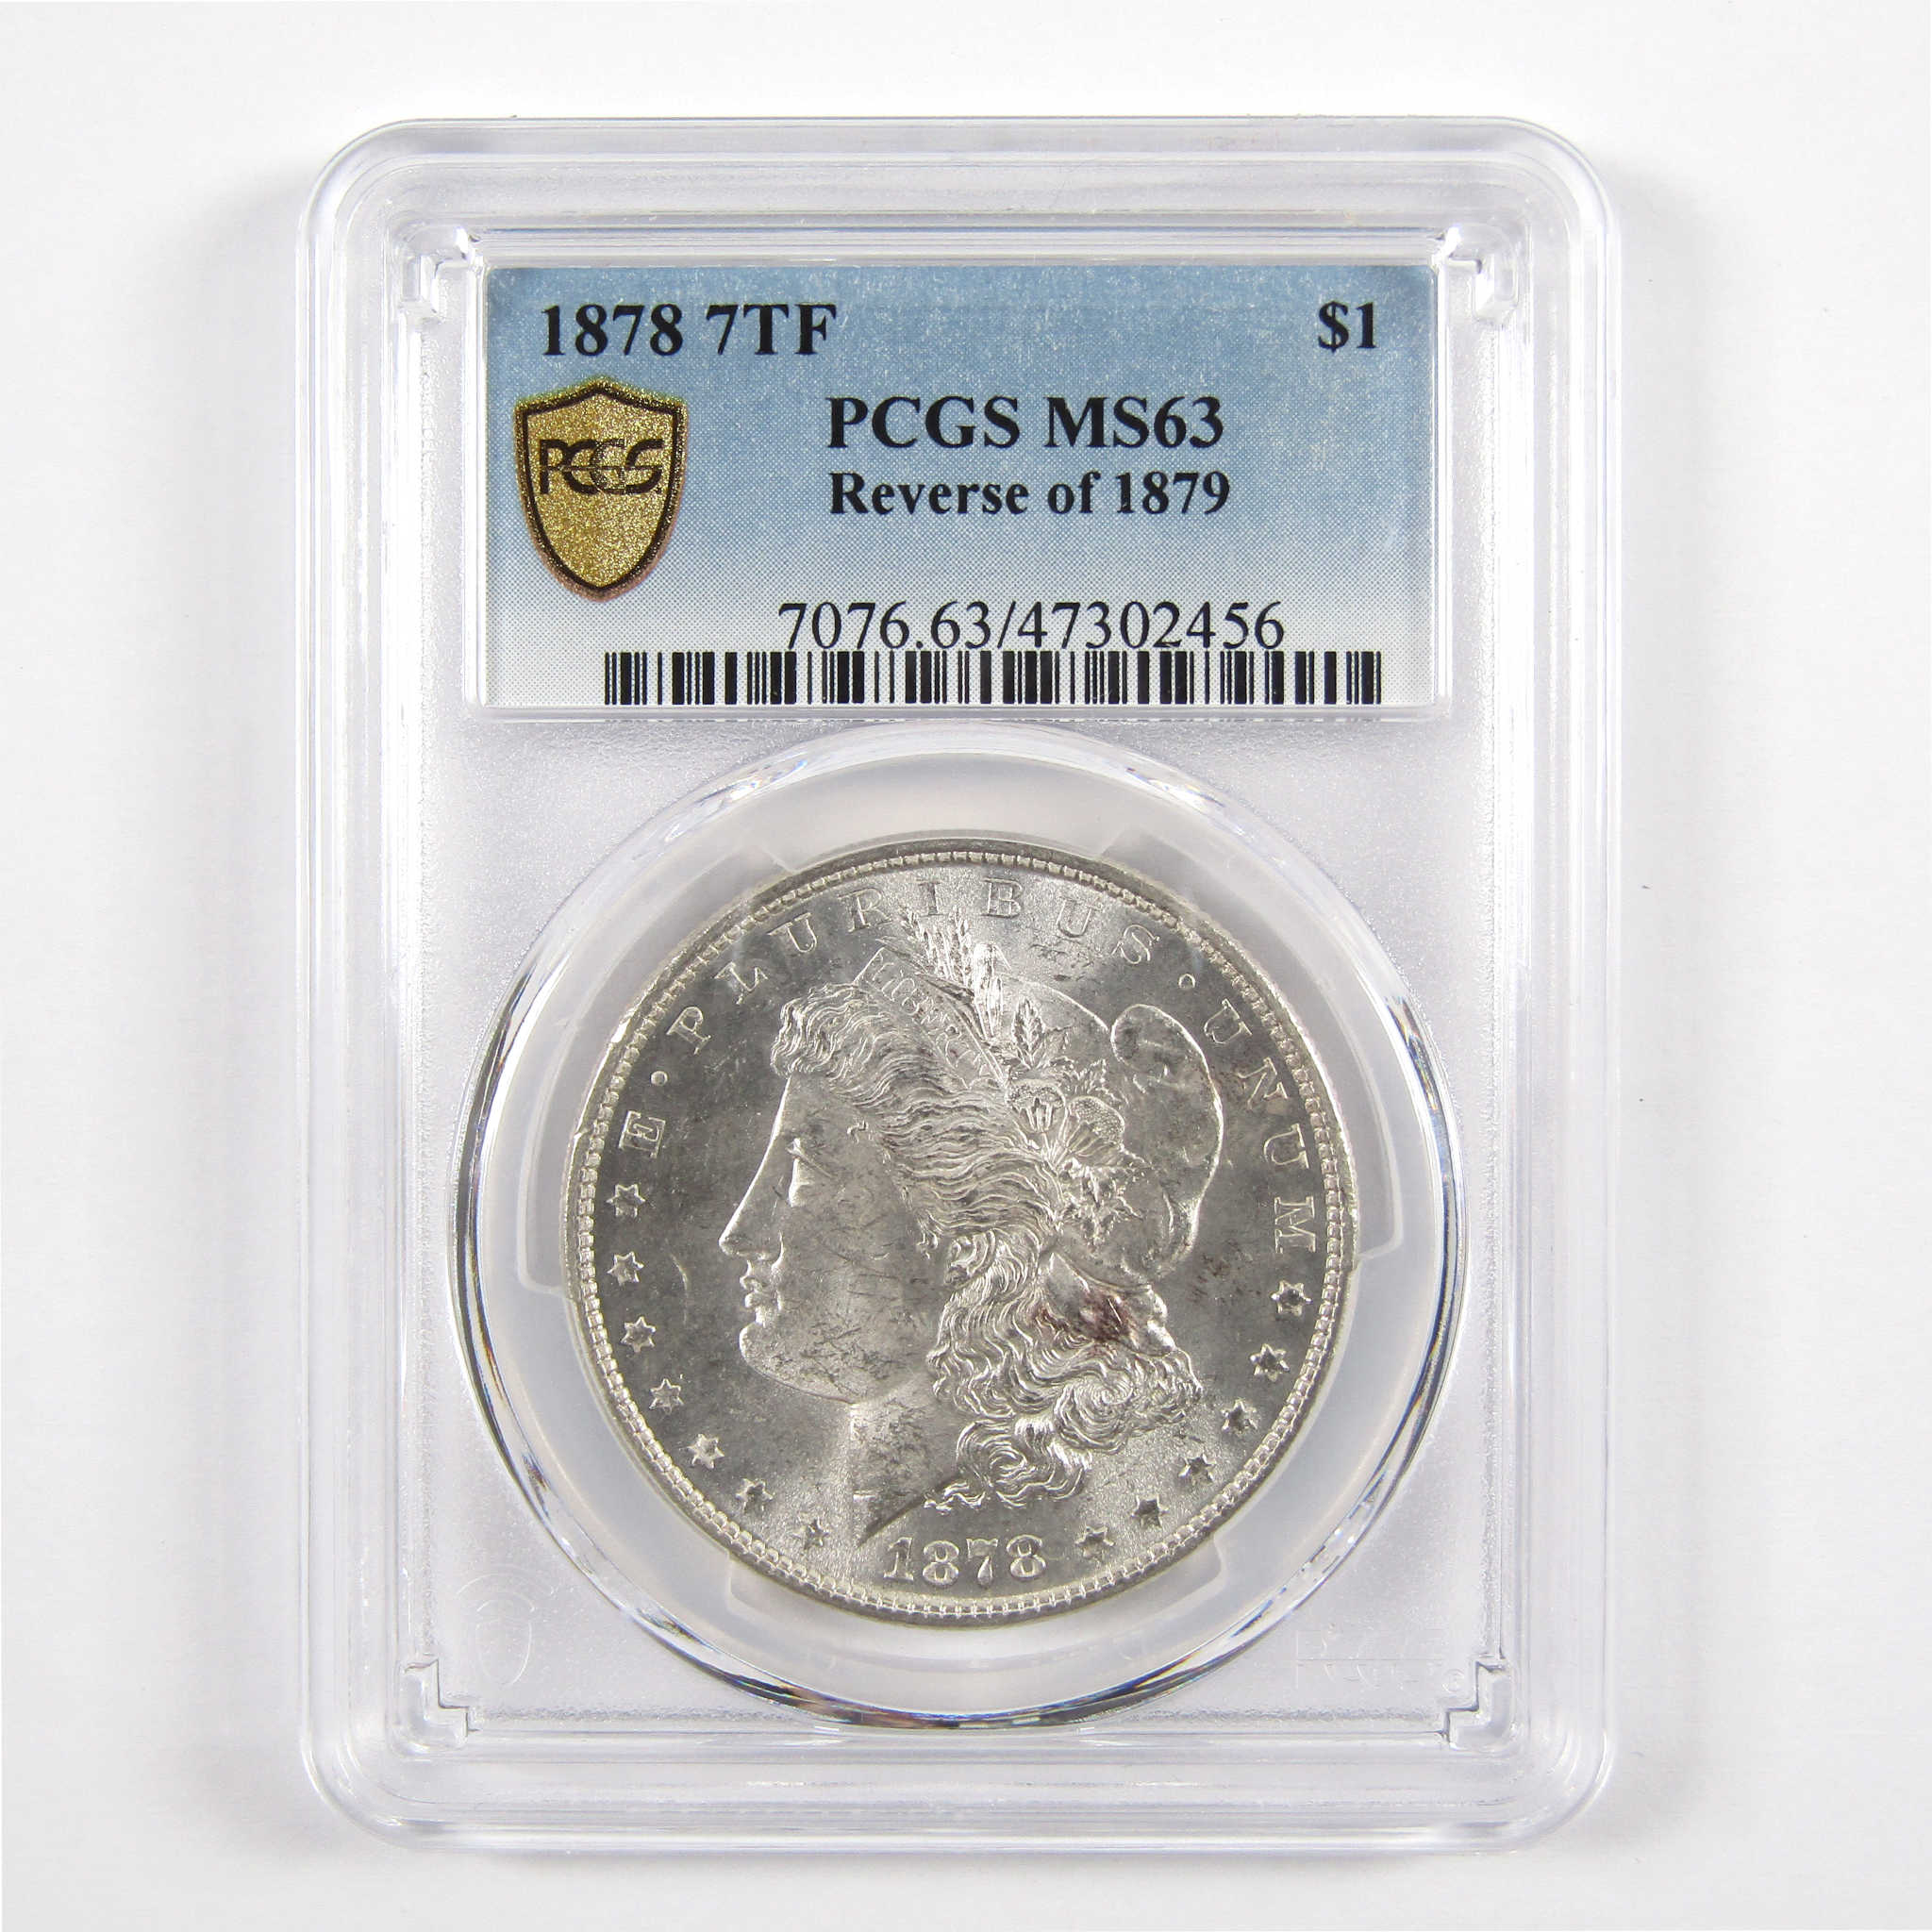 1878 7TF Rev 79 Morgan Dollar MS 63 PCGS 90% Silver $1 SKU:I11201 - Morgan coin - Morgan silver dollar - Morgan silver dollar for sale - Profile Coins &amp; Collectibles